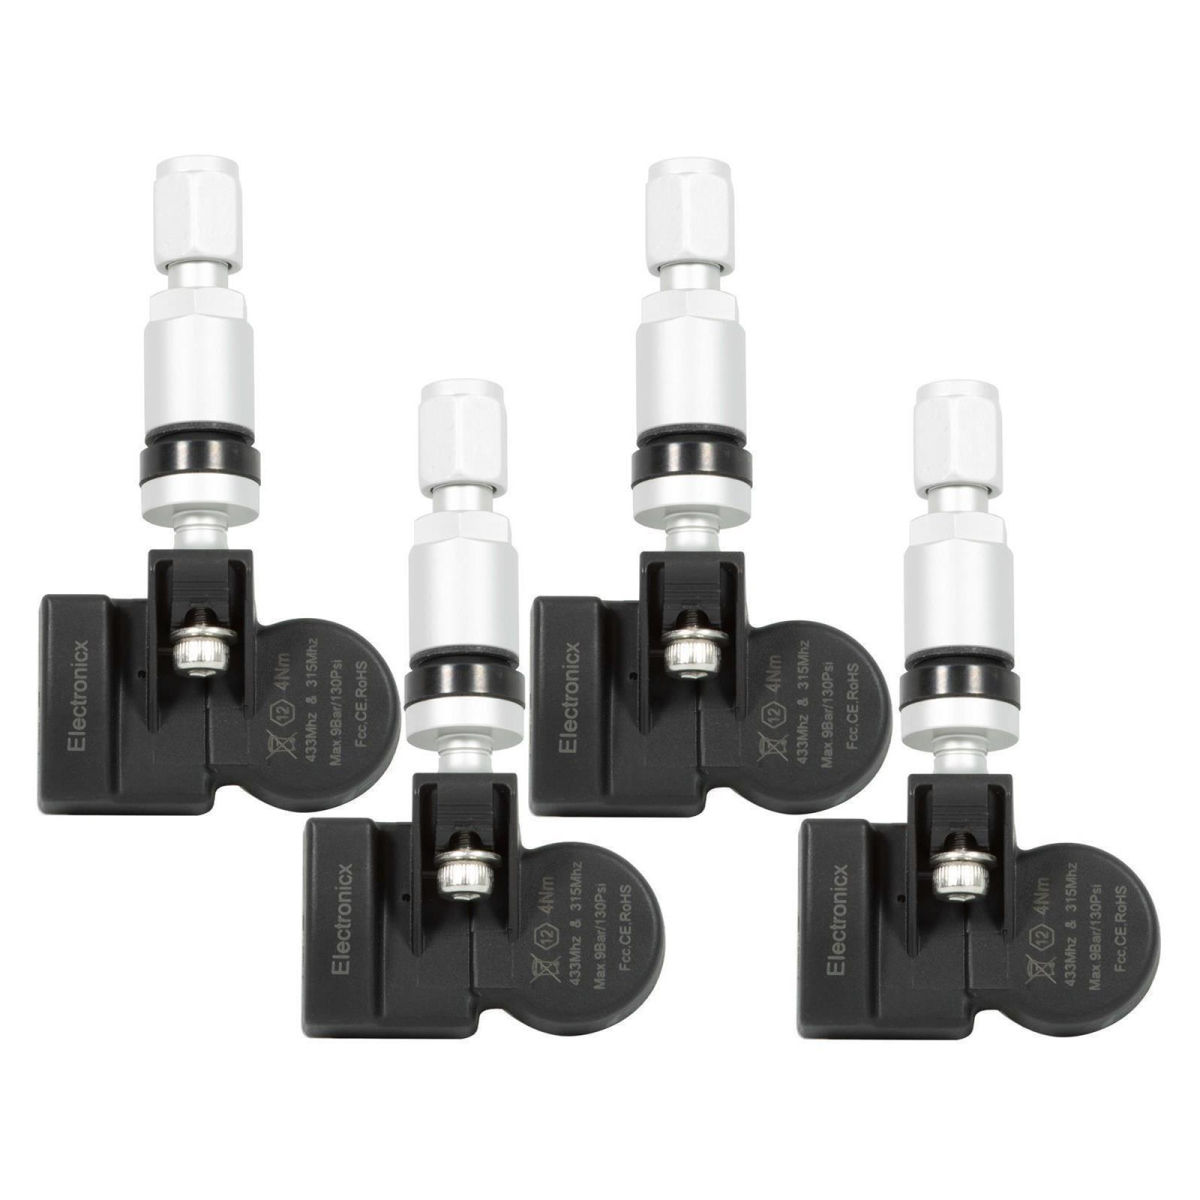 4x 315MHZ TPMS tire pressure sensors metal valve for Ford Edge F150 Lincoln